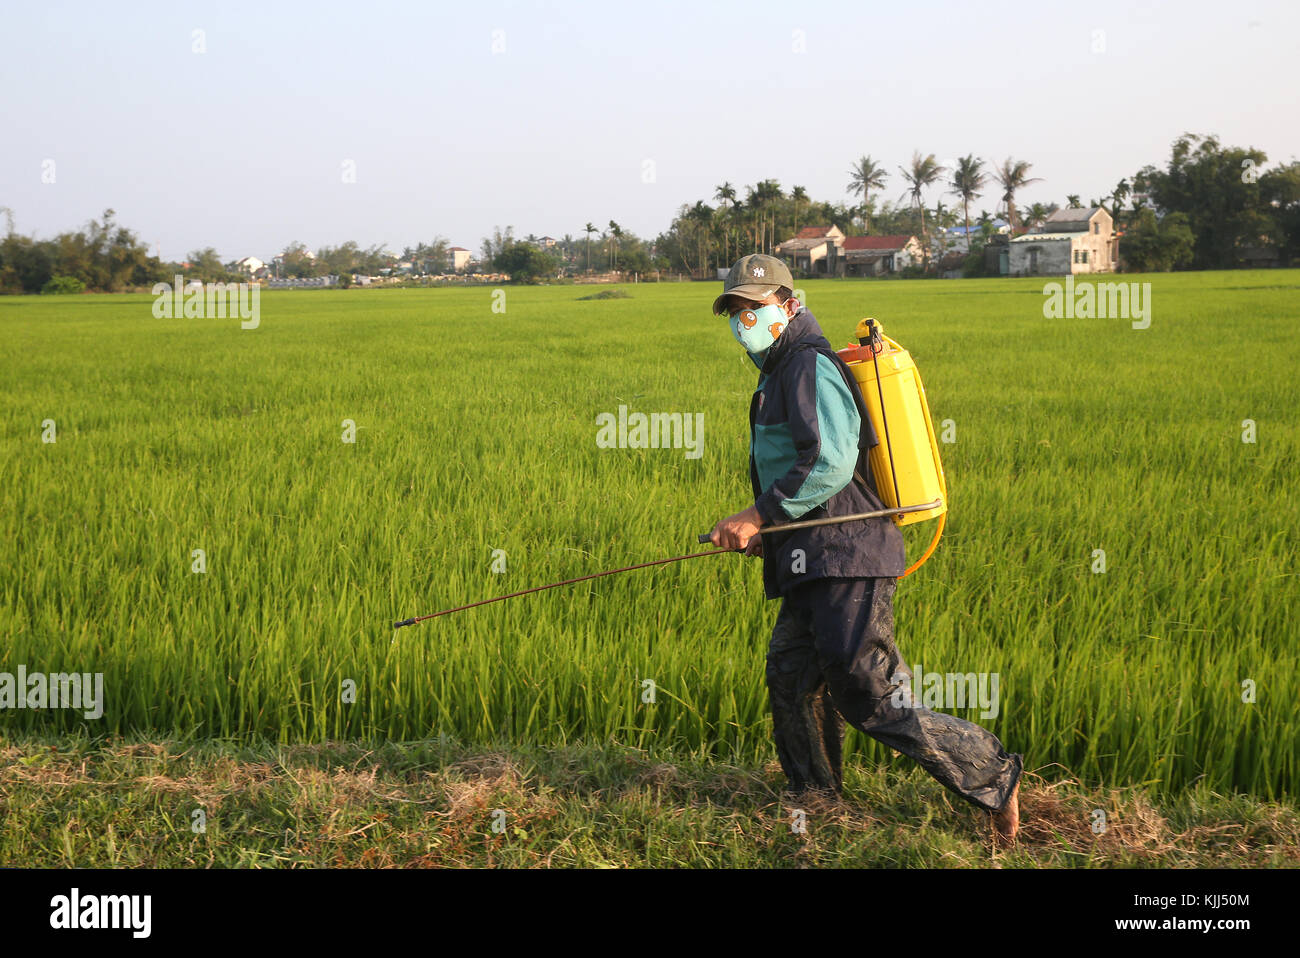 Vietnamese farmer at work in his rice field. Spraying pesticide. Hoi An. Vietnam. Stock Photo